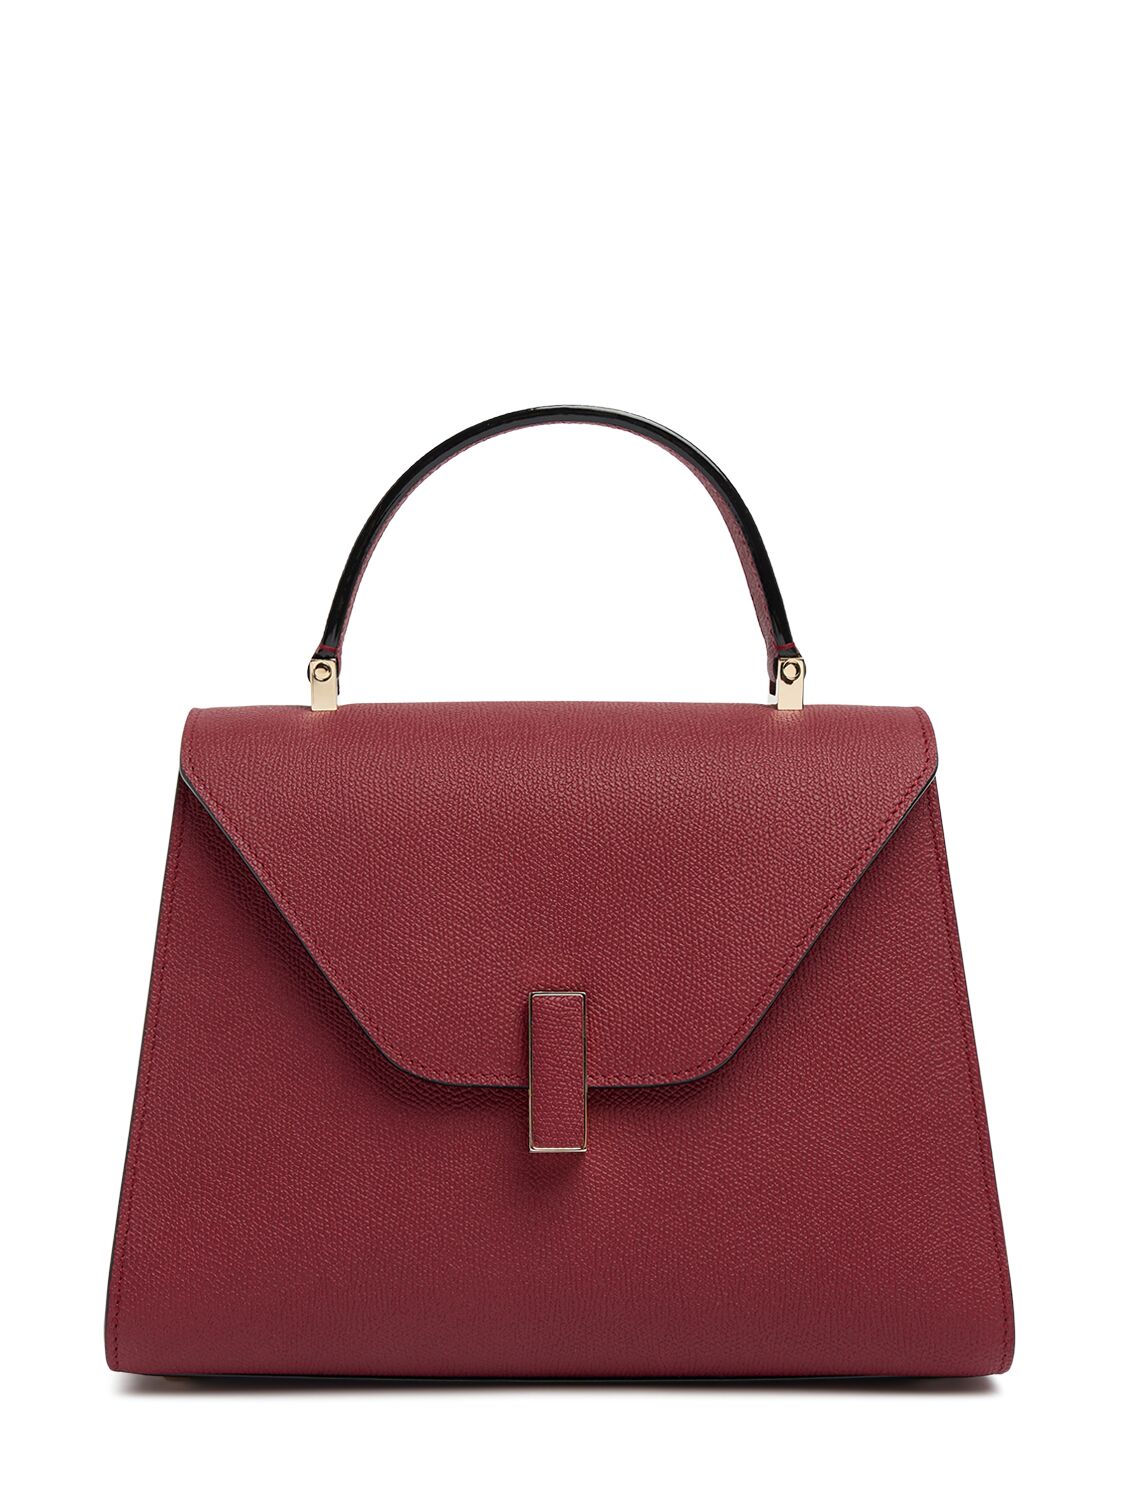 Valextra Medium Iside Soft Grained Leather Bag In Burgundy